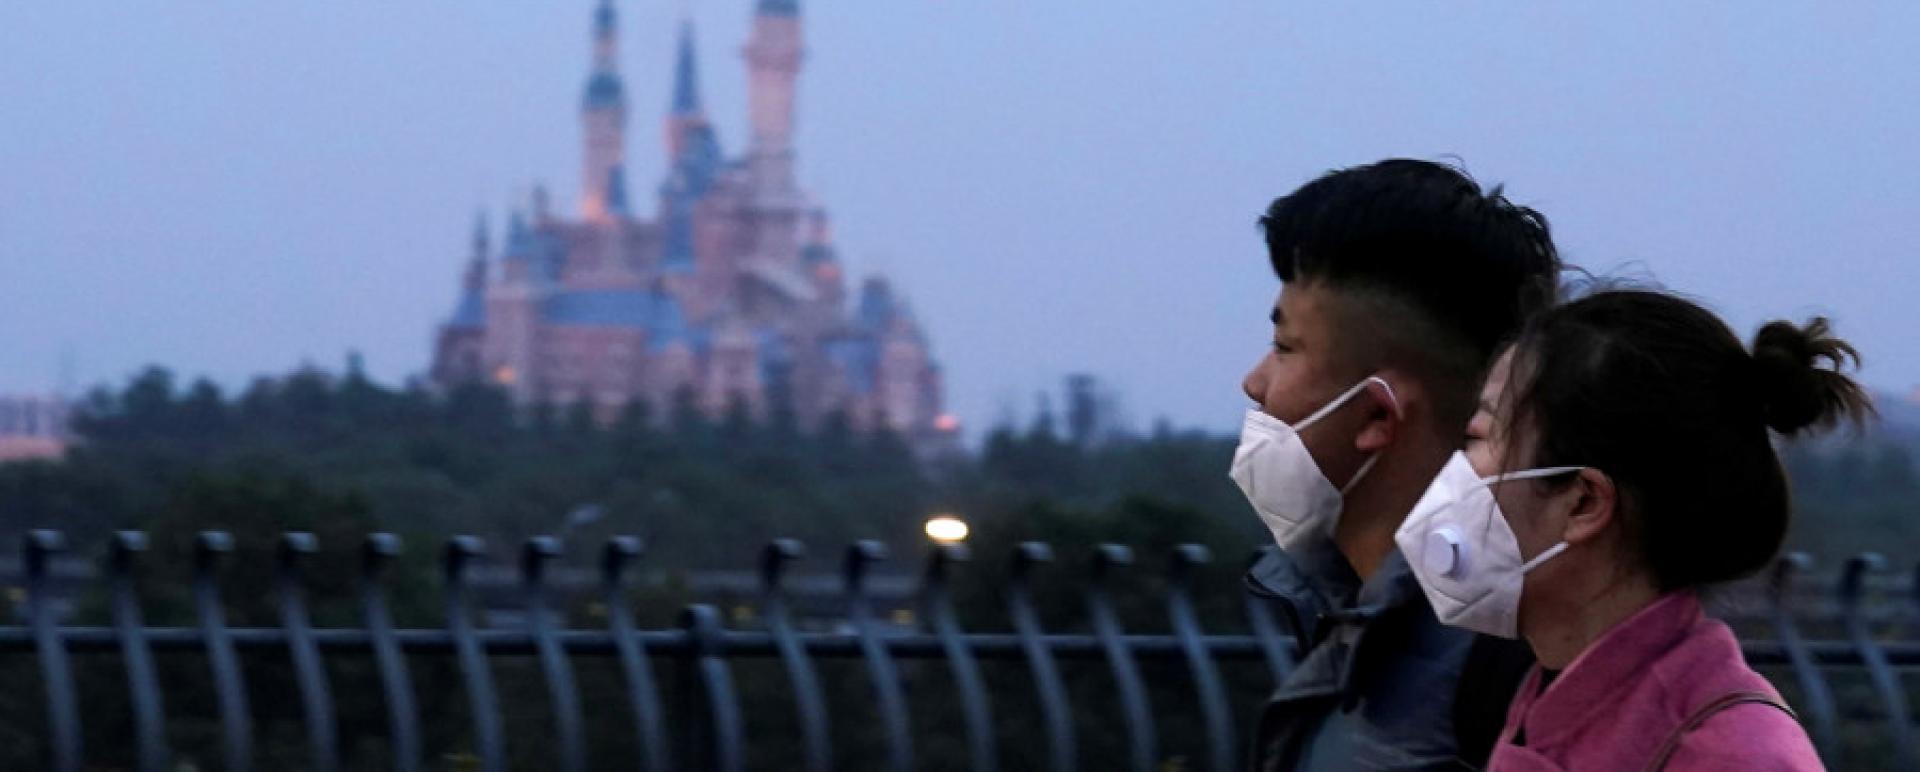  Visitors wearing masks walk past Shanghai Disney Resort, China, on Friday. The resort was closed during the Chinese Lunar New Year holiday on Saturday following the outbreak of a new coronavirus. Reuters